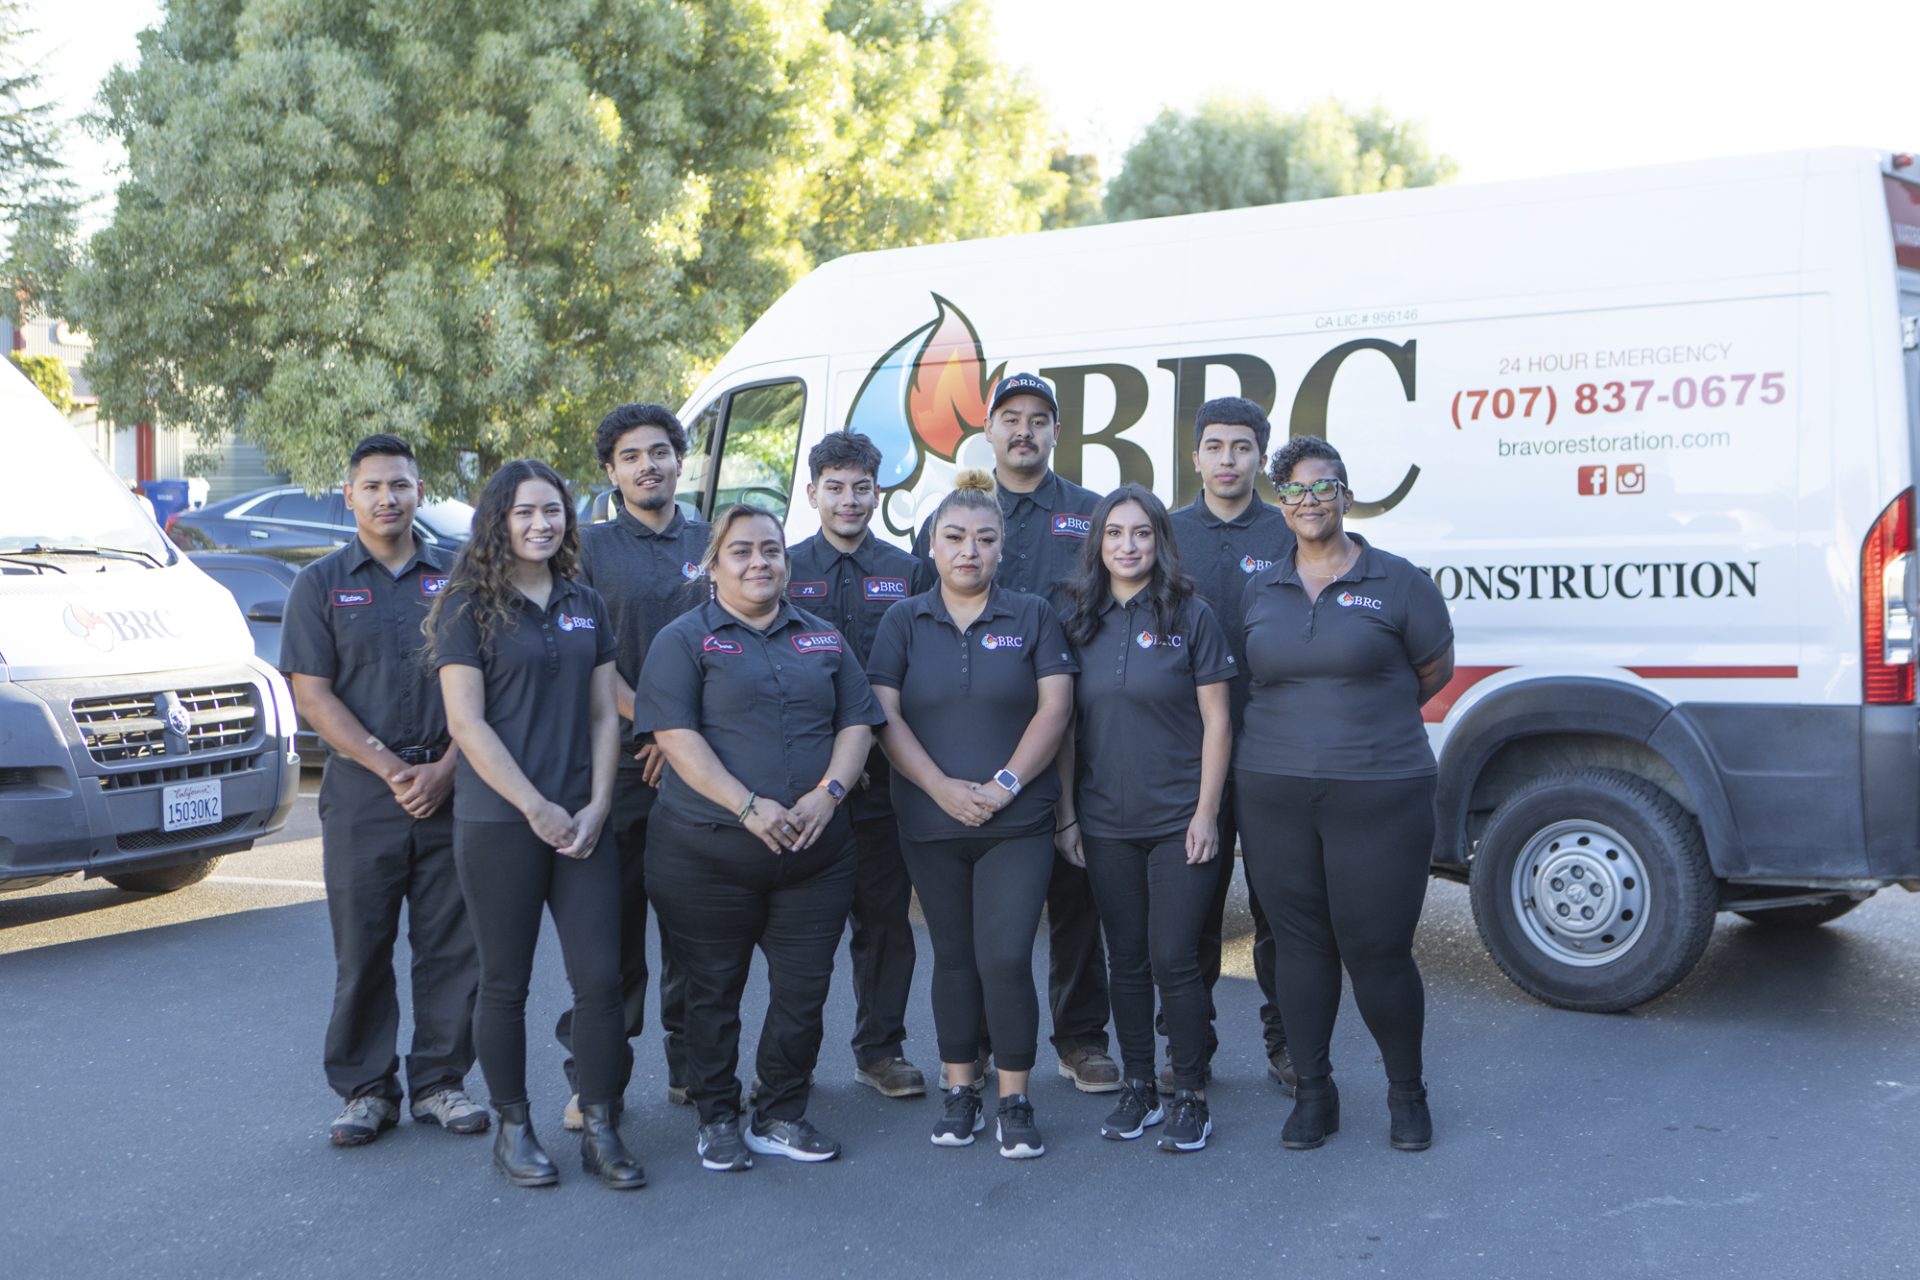 Bravo Restoration's team of mold remediation experts and fire damage remediation experts are seen standing in front of their service van.